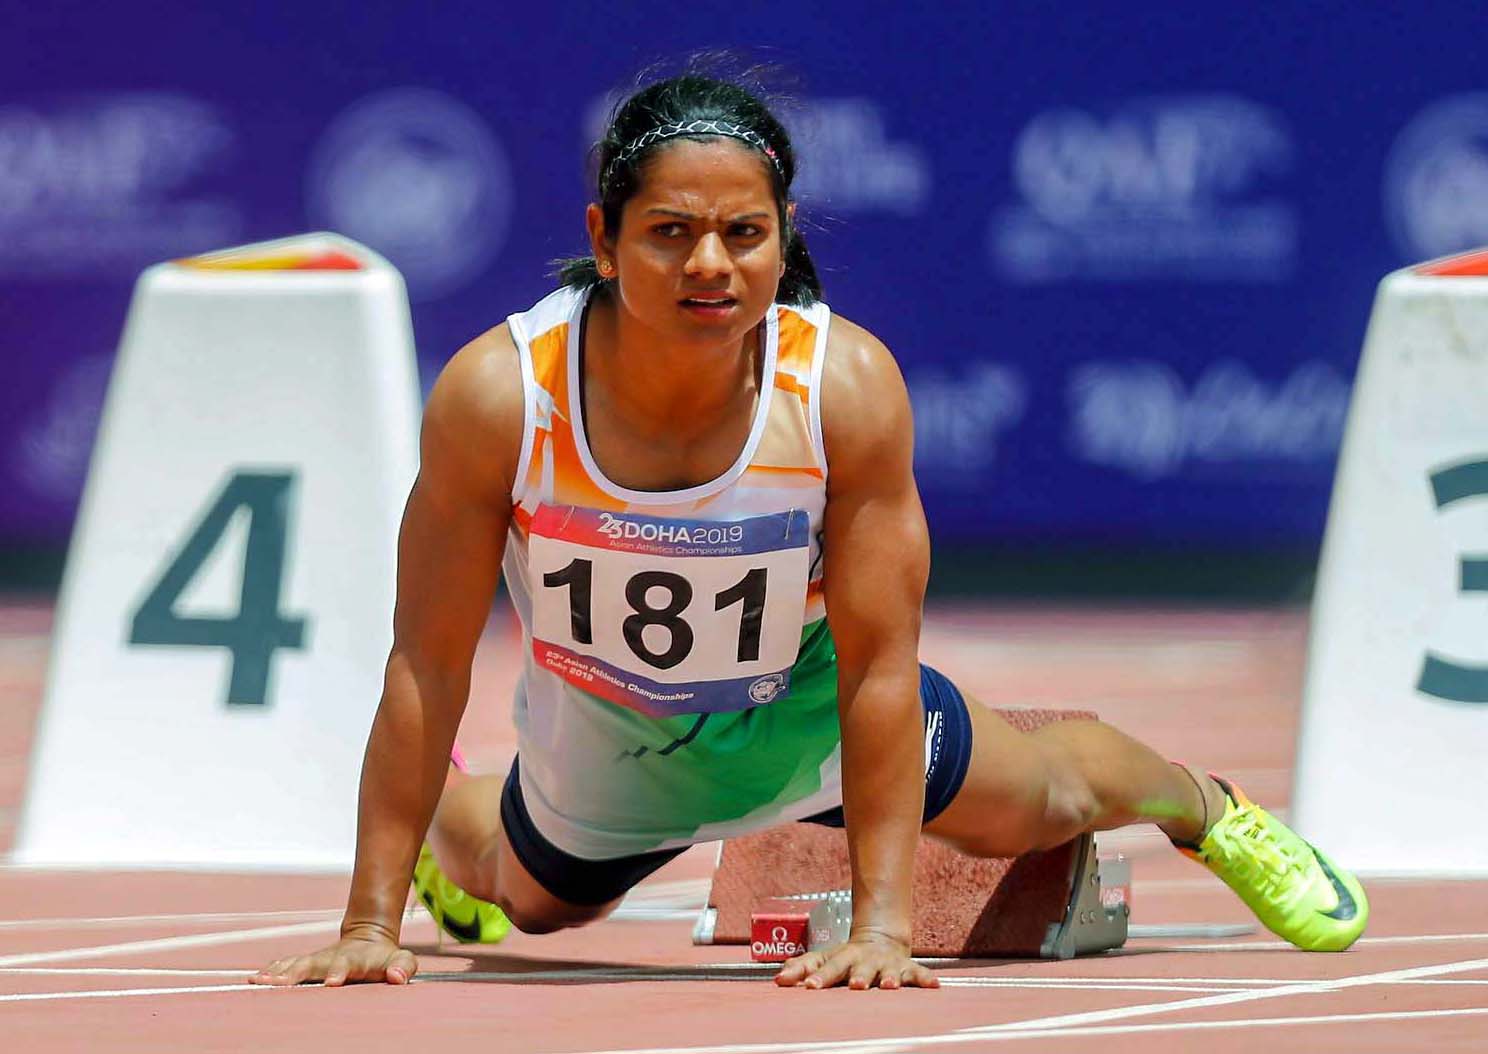 Odisha sprint marvel Dutee Chand in action at the 23rd Asian Athletics Championship 2019 in Doha.